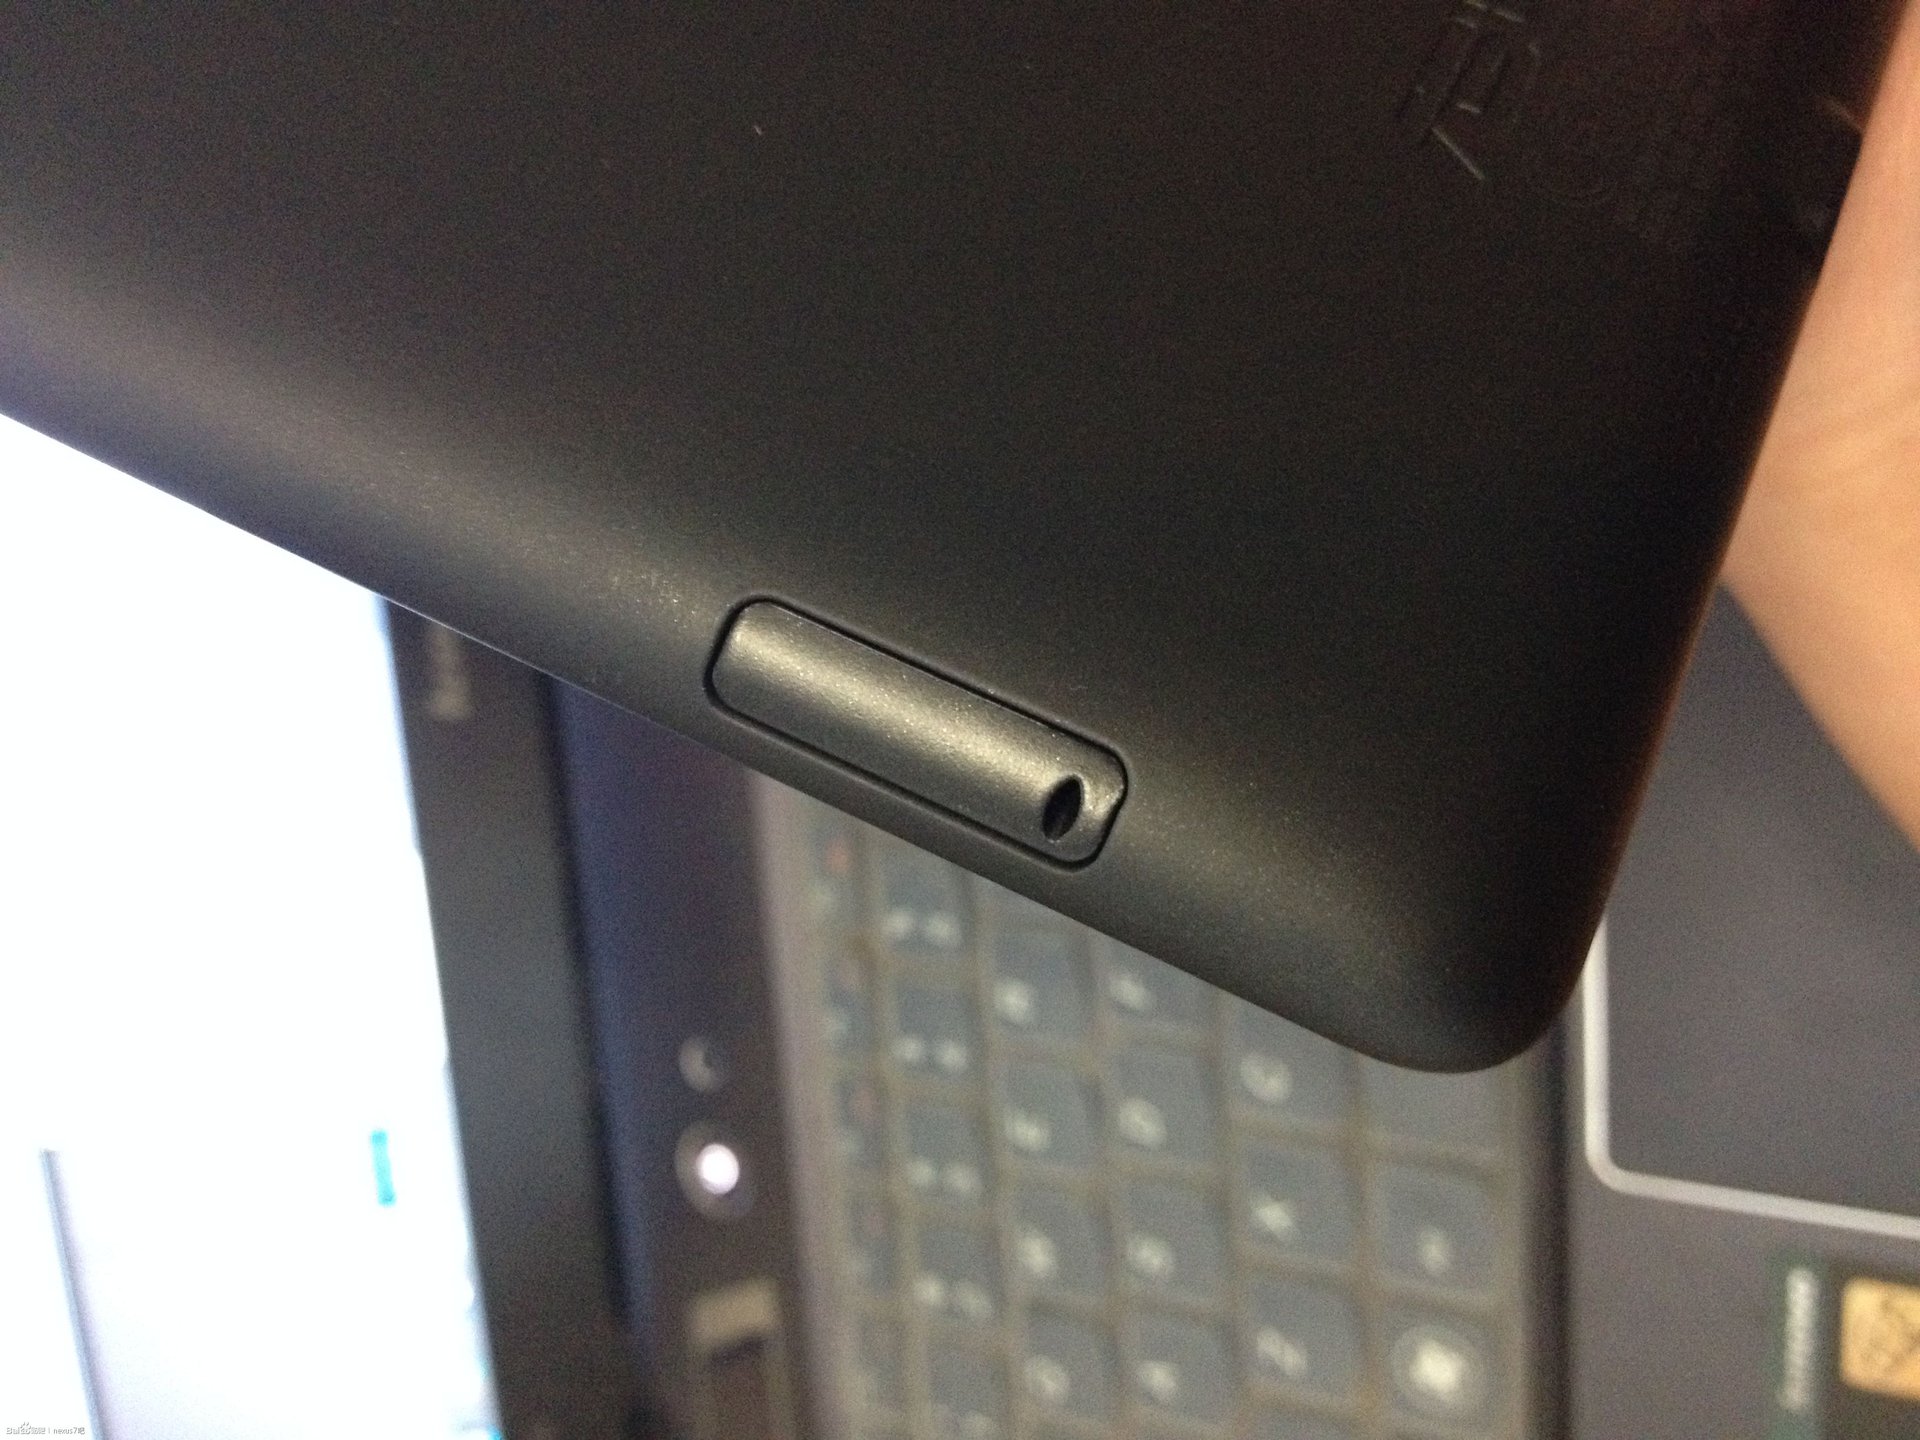 Here's the evidence of the sim card slot. 